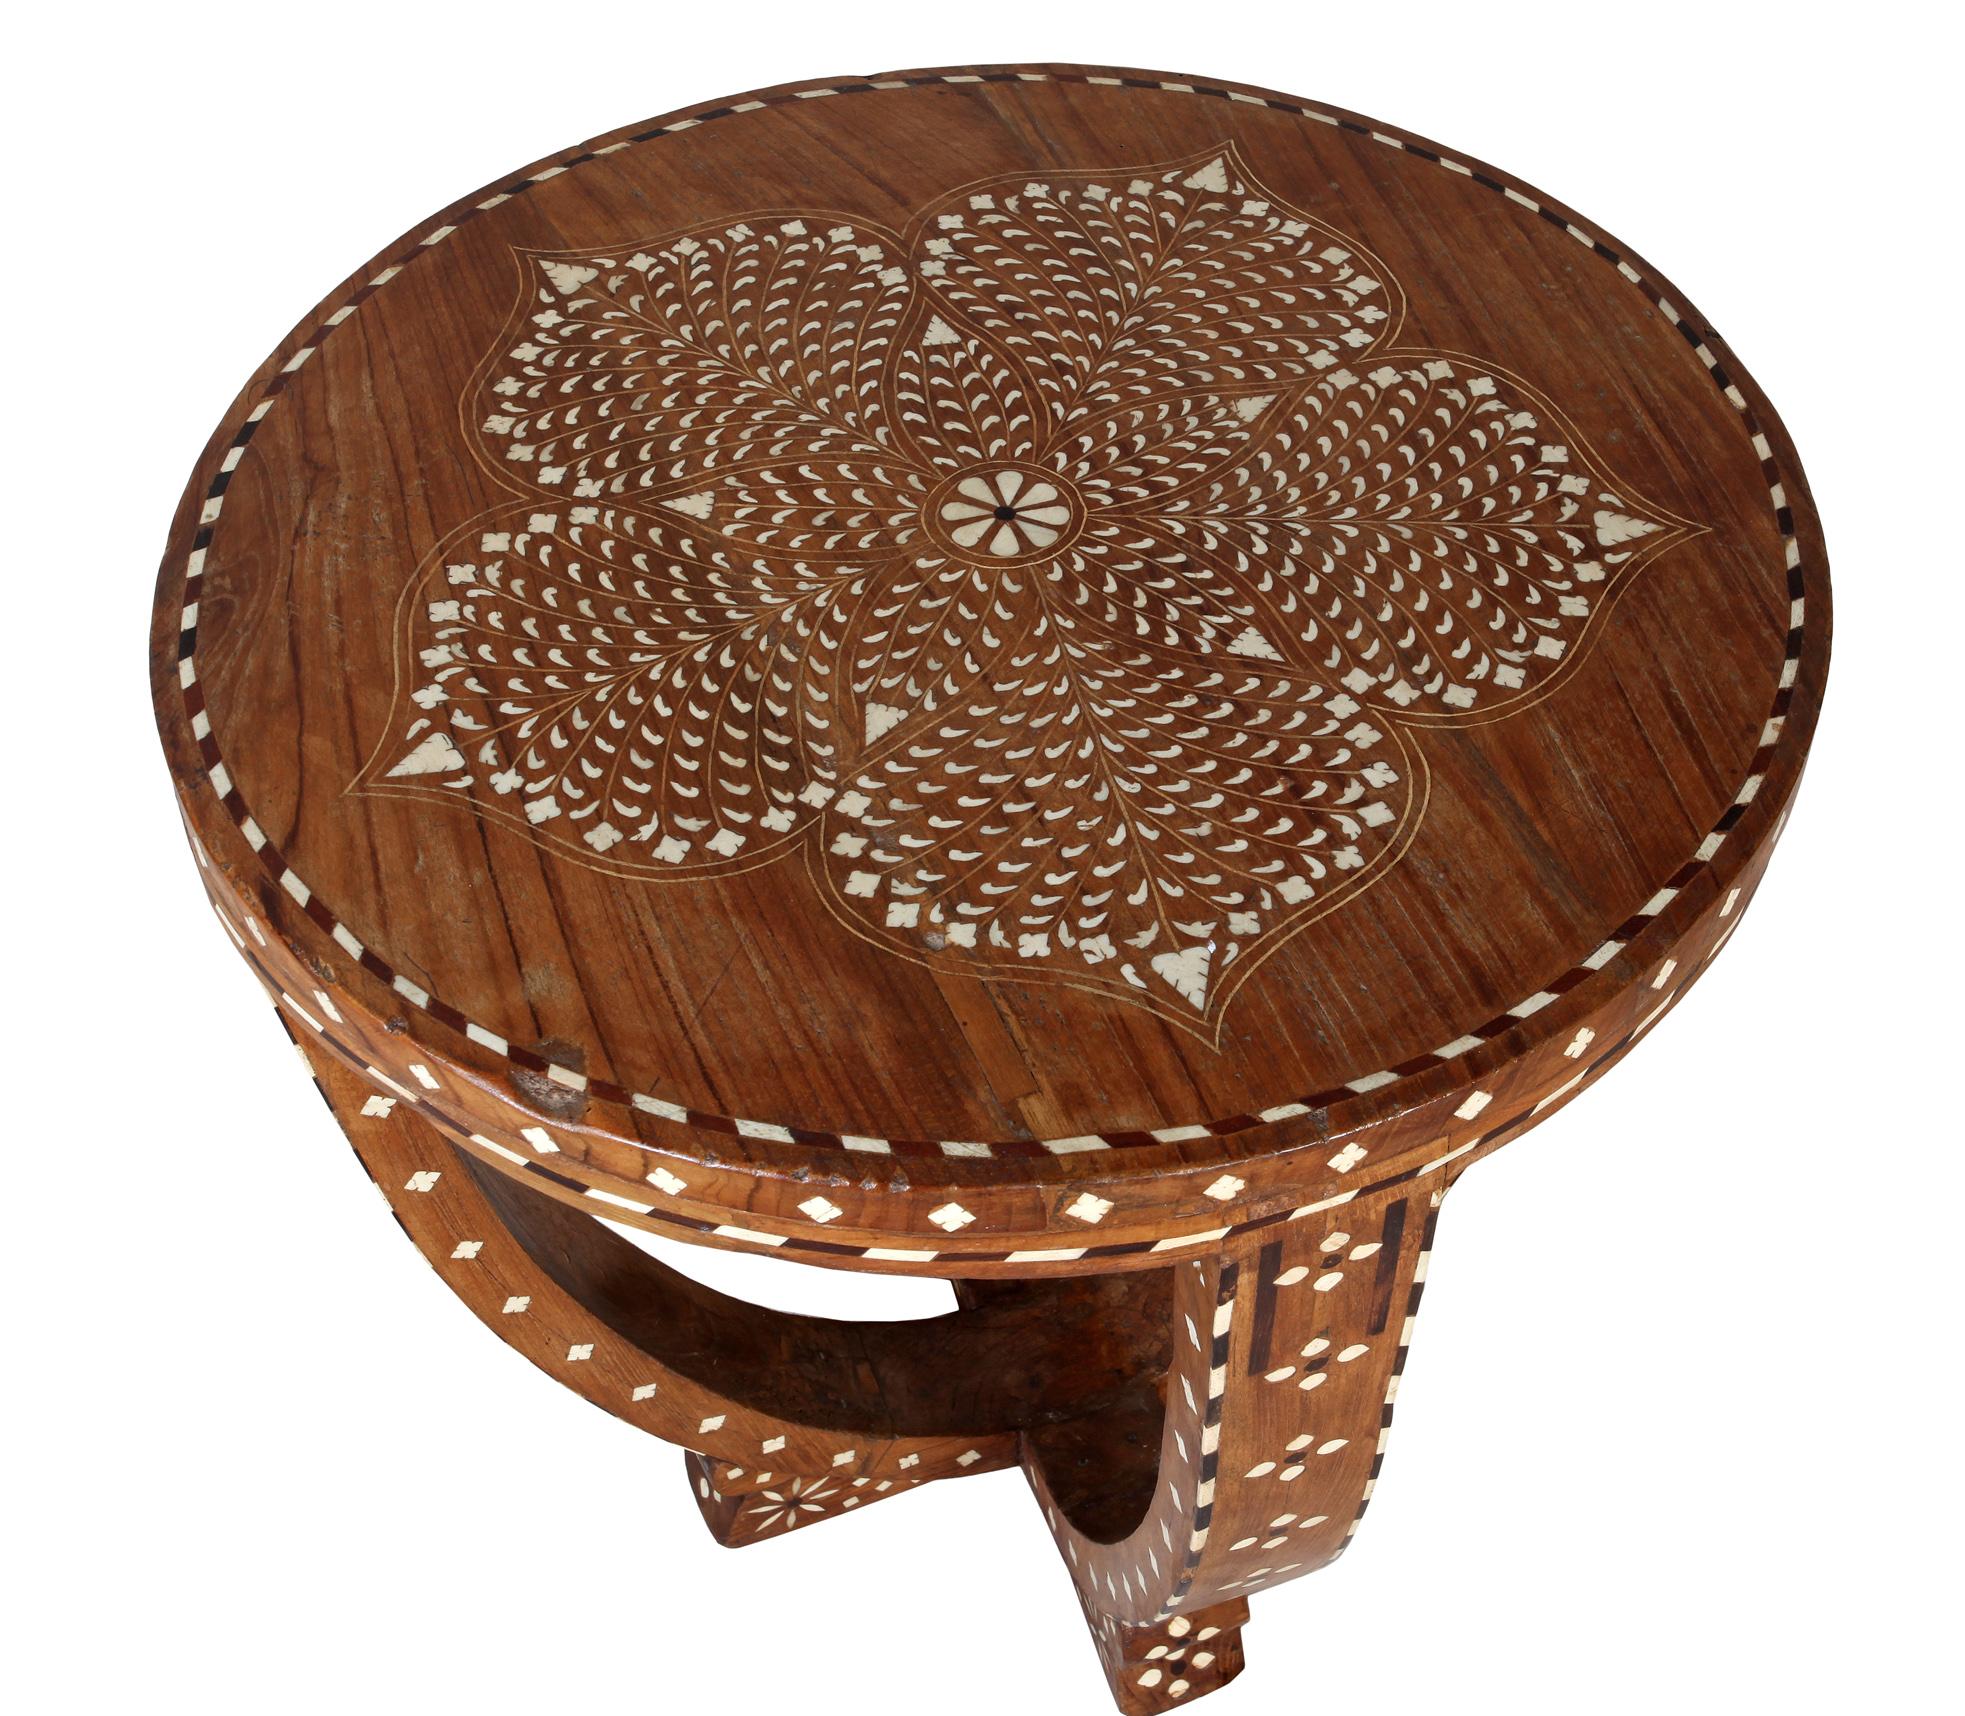 Teak center or side table with incredibly intricate bone and rosewood inlay. U-Shaped base. Flower petal motif on tabletop. Mid-1900s, India.